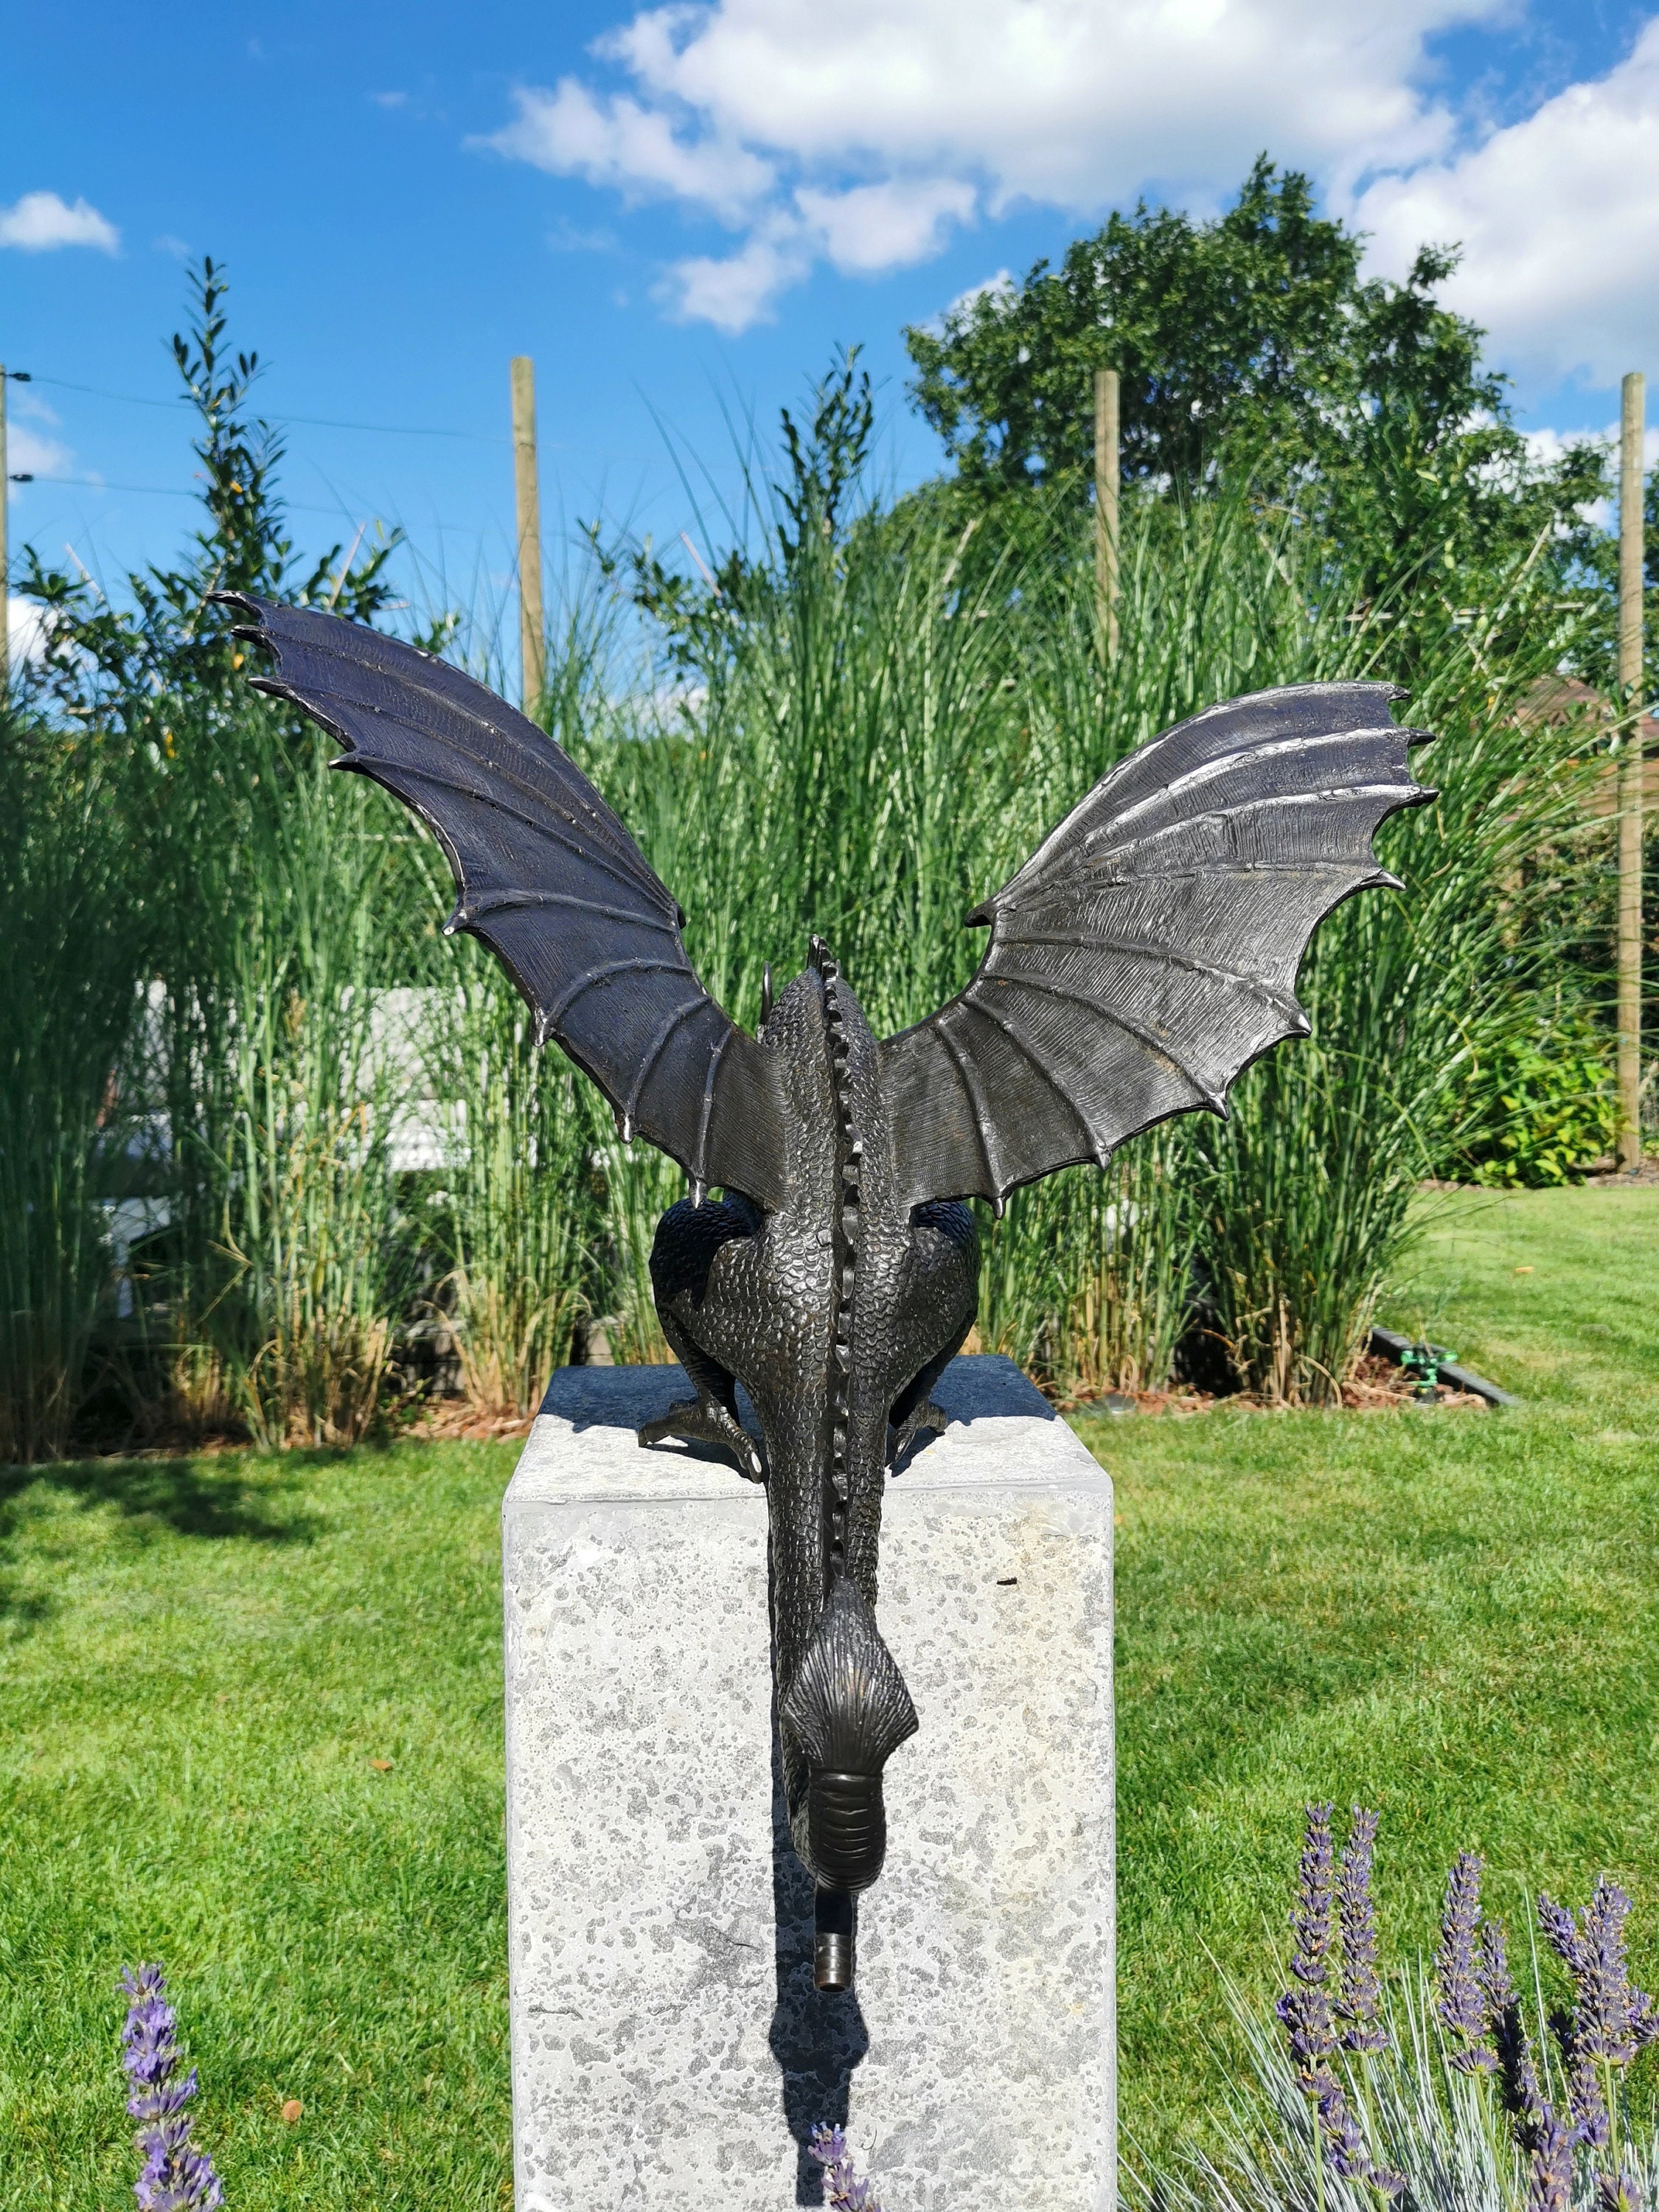 Dragon Fountain Self-Pipe Precision Cast Solid Bronze Outdoor Statues Outdoor Water Feature for Home Outdoor Garden Pool Fountain Decoration Gothic Garden Decor Statue 